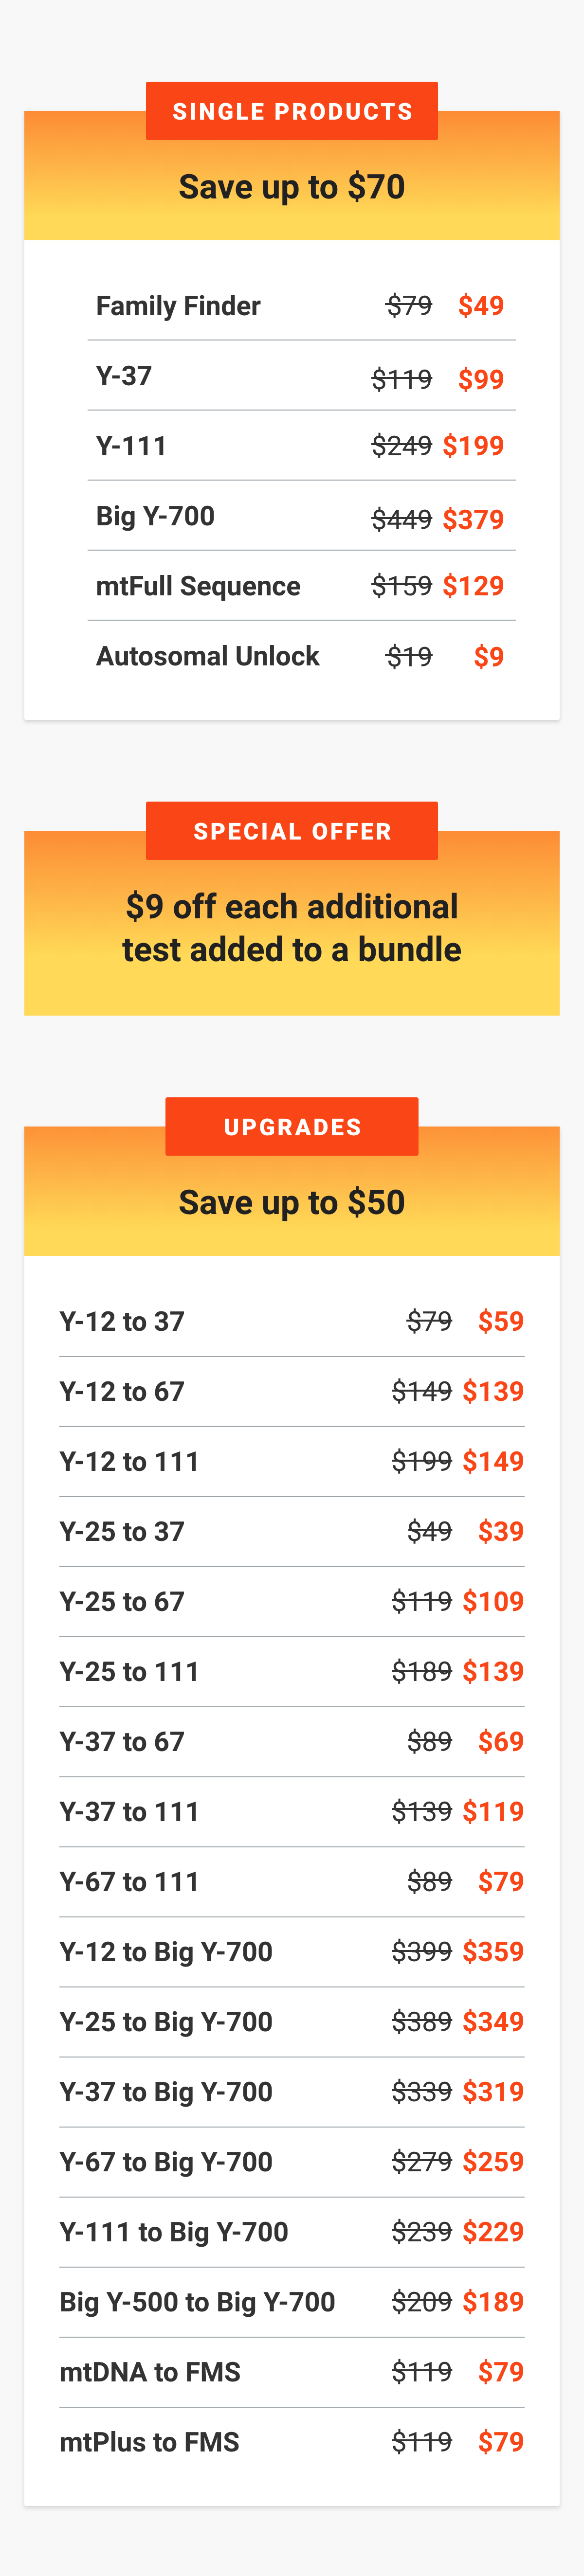 Single Product and Upgrade Pricing Tables - Up to $70 Off